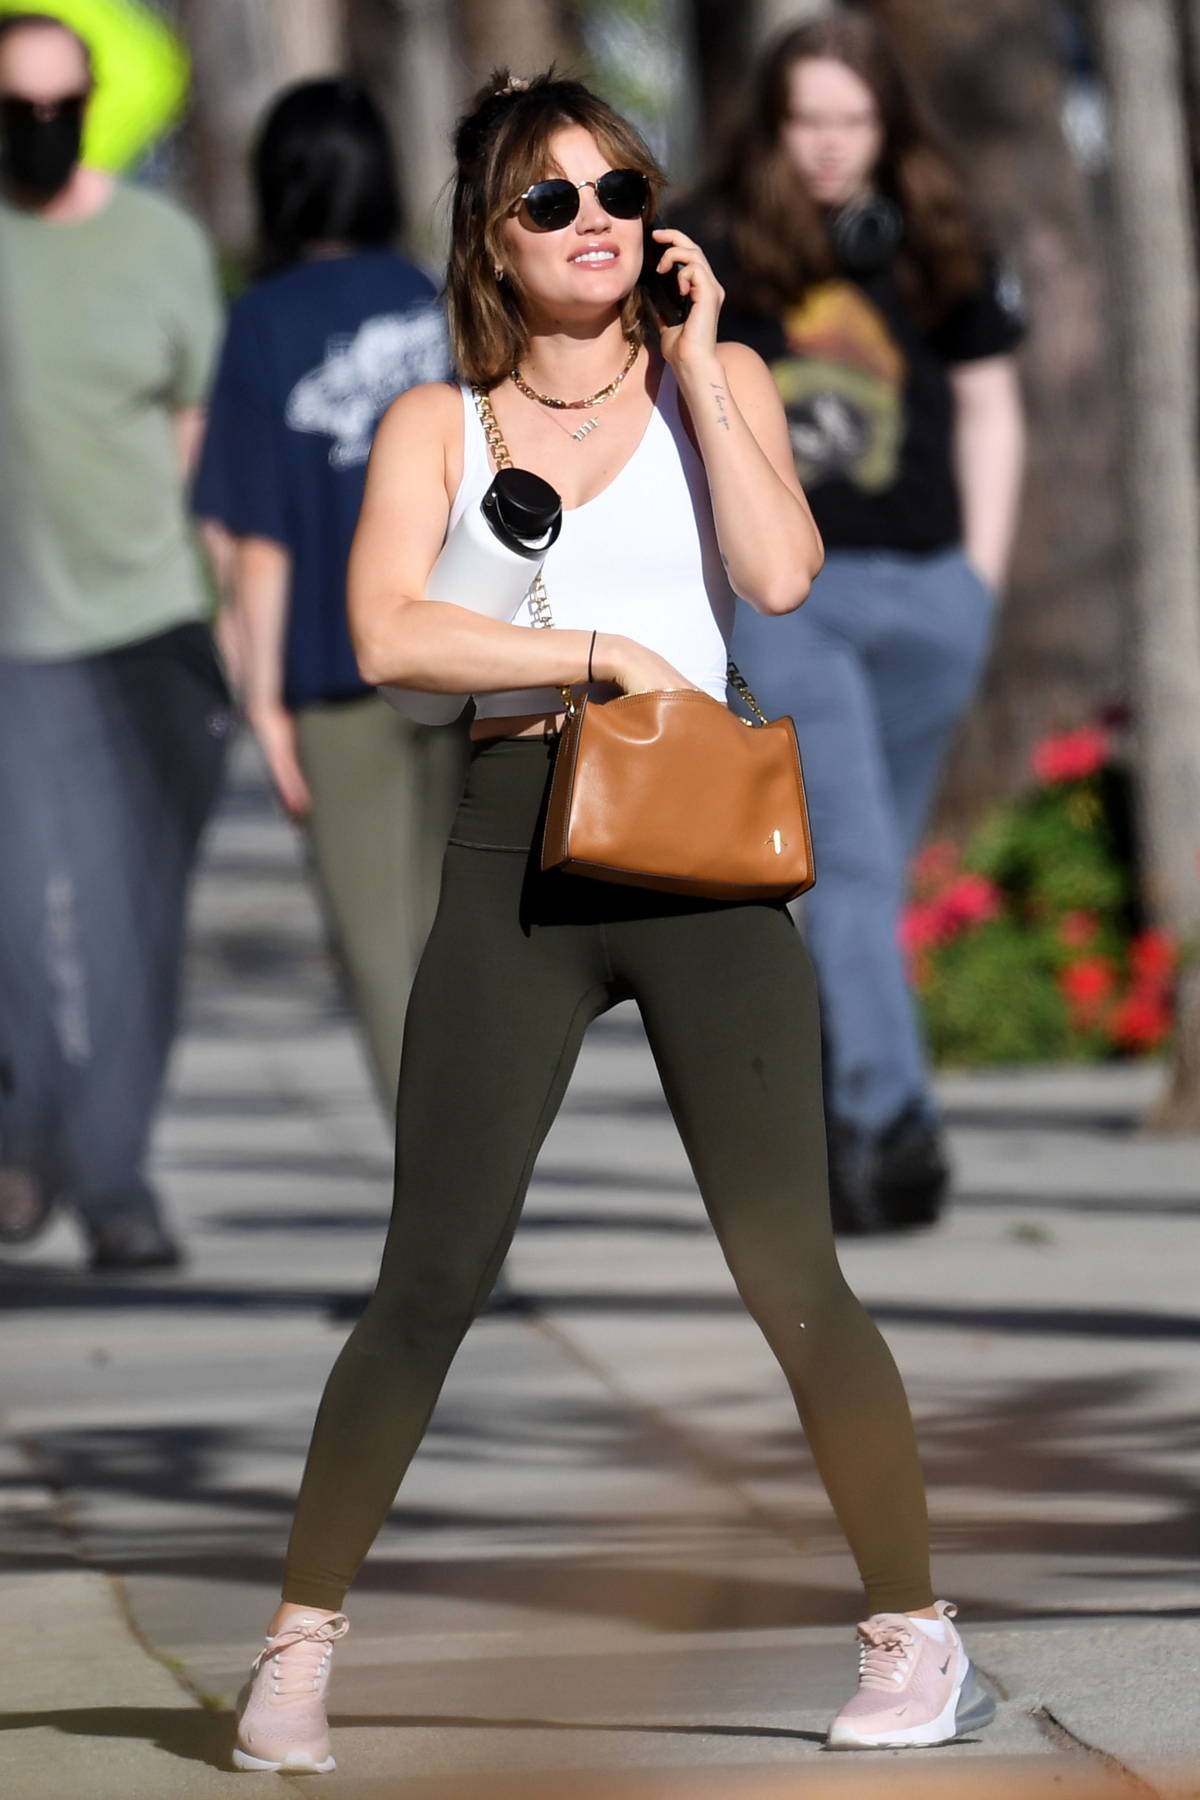 Lucy Hale sports a green tank top and black leggings as she leaves